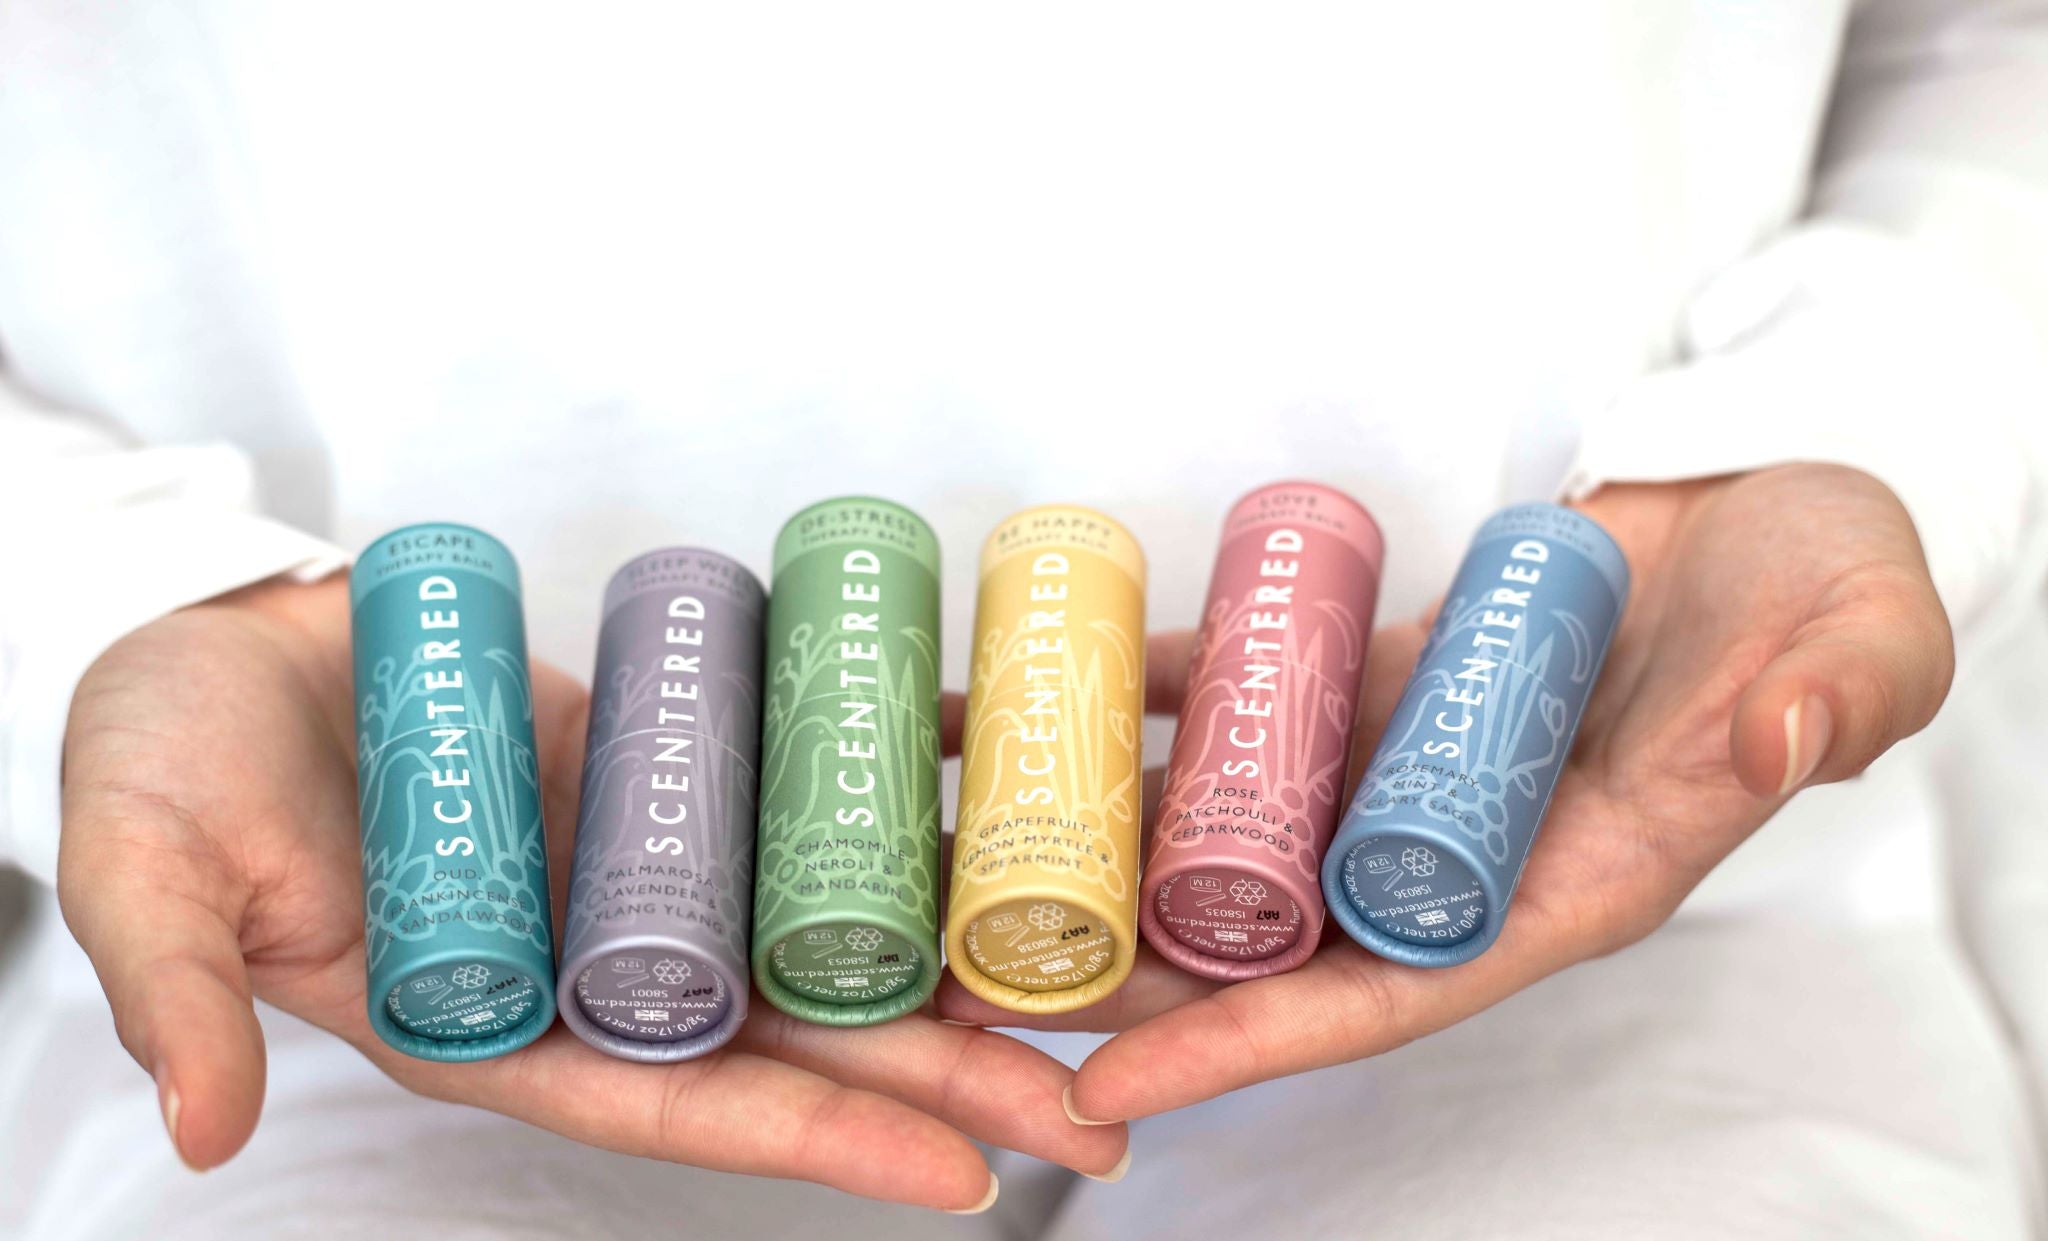 All of the six Scentered Aromatherapy Balms in a woman's hands